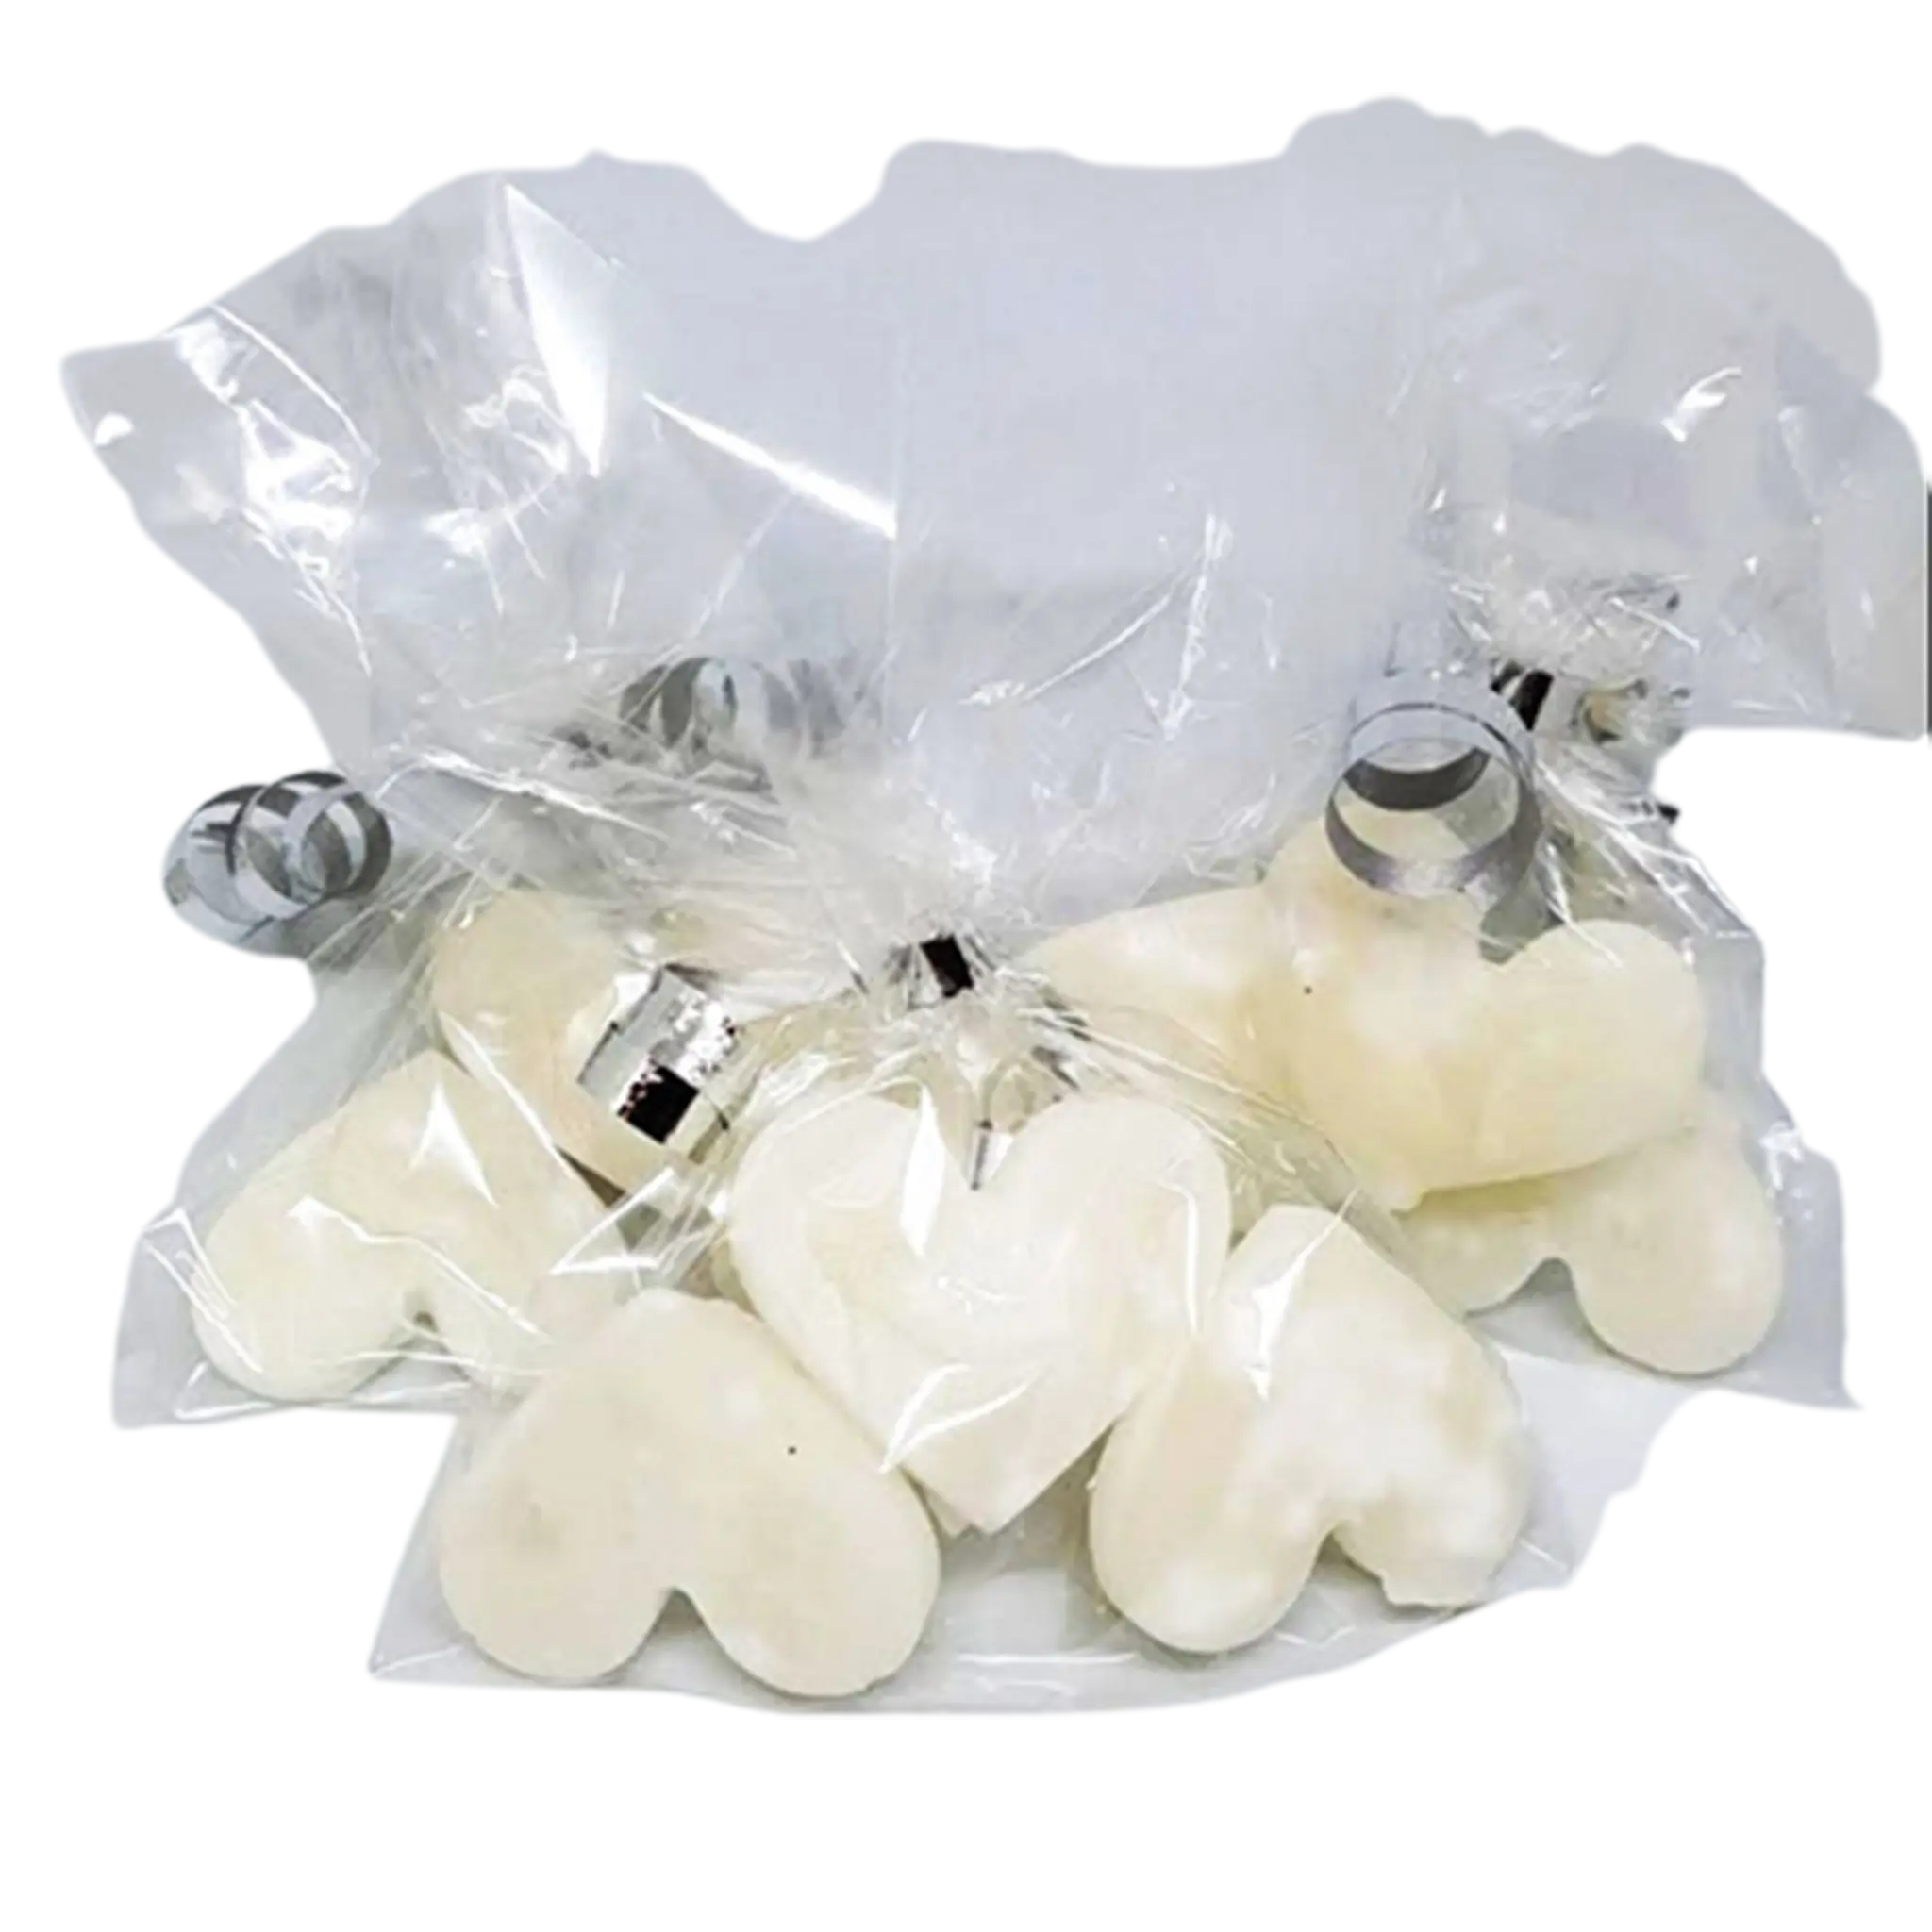 three transparent bags each containing three white kendal mint cake pieces in the shape of a heart. the bags are tied with a silver ribbon